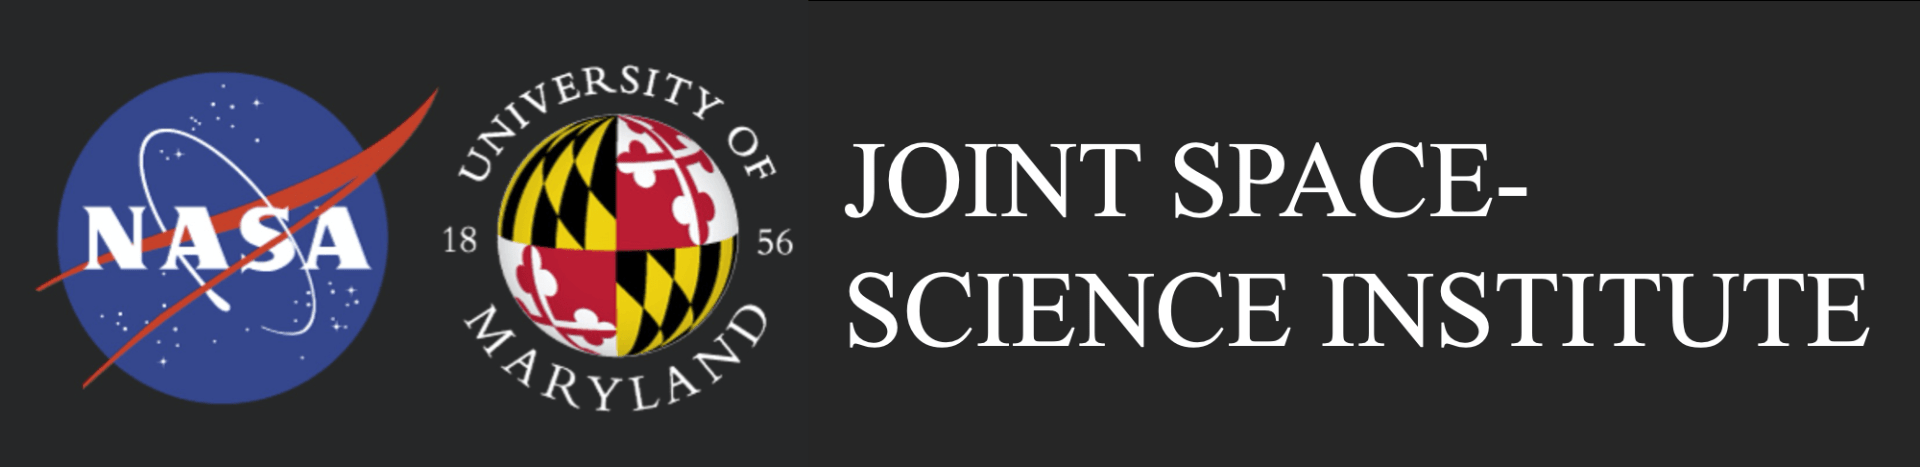 Joint Space-Science Institute